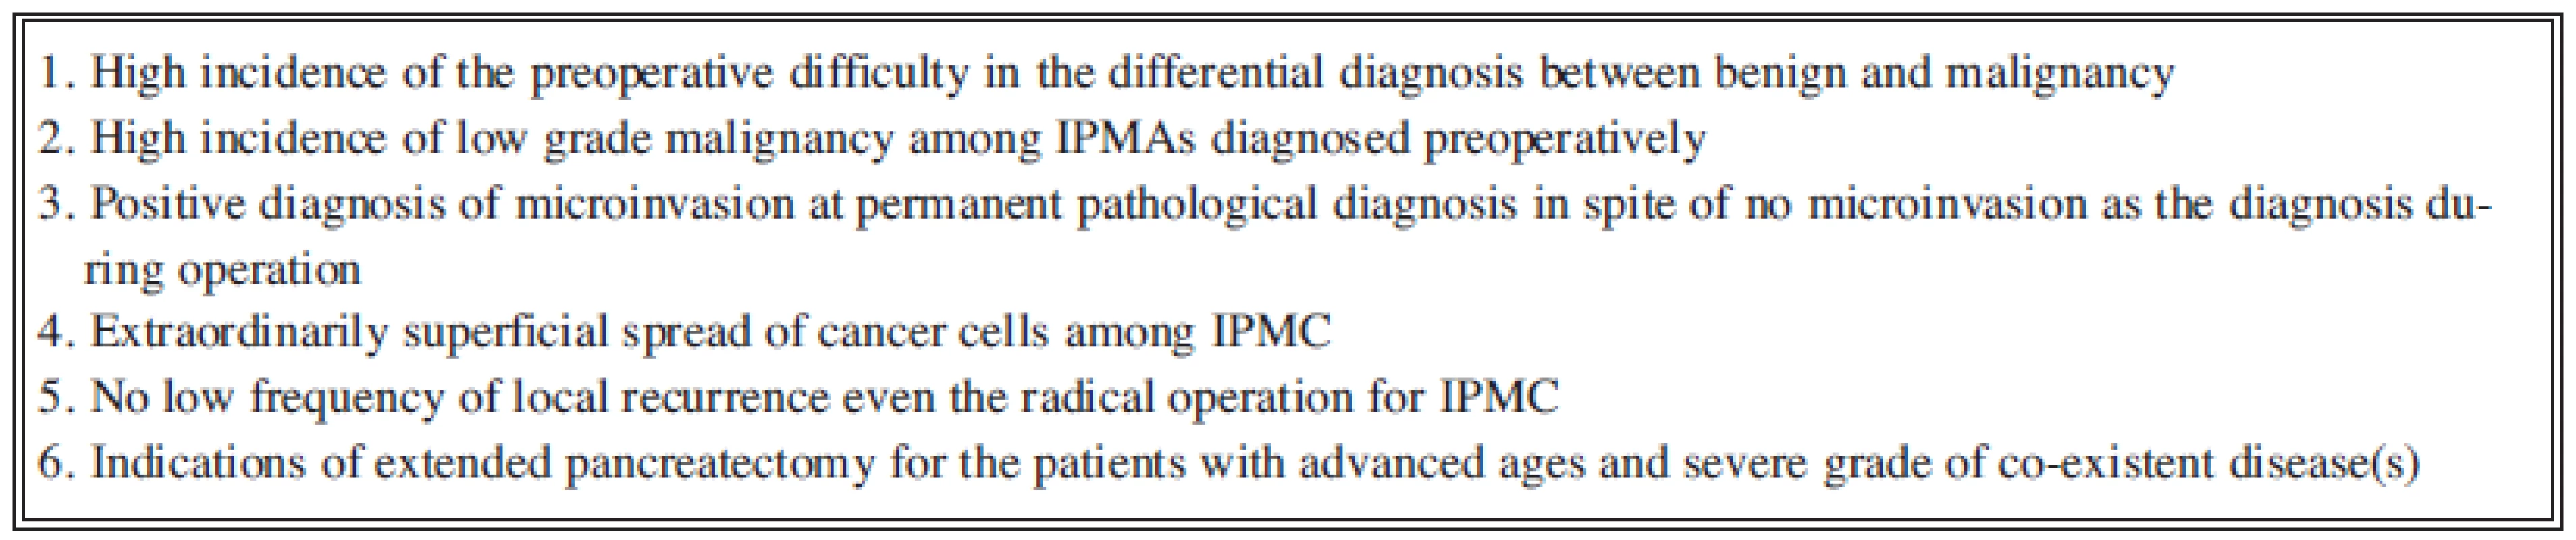 Present limitations and problems on the selection of surgical treatments for IPMC